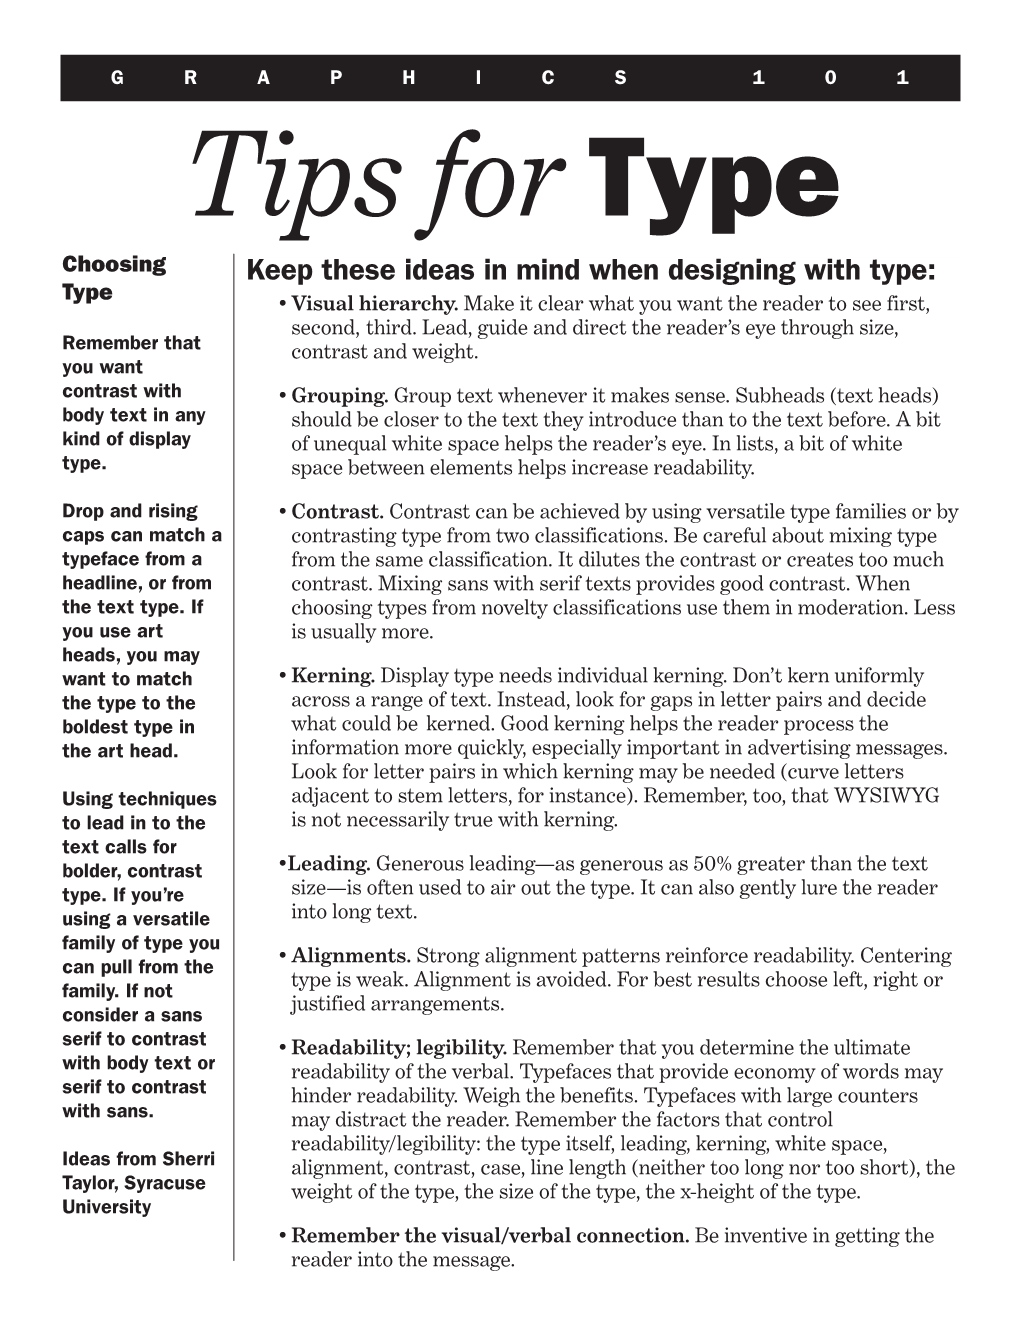 Tips for Type Choosing Keep These Ideas in Mind When Designing with Type: Type • Visual Hierarchy